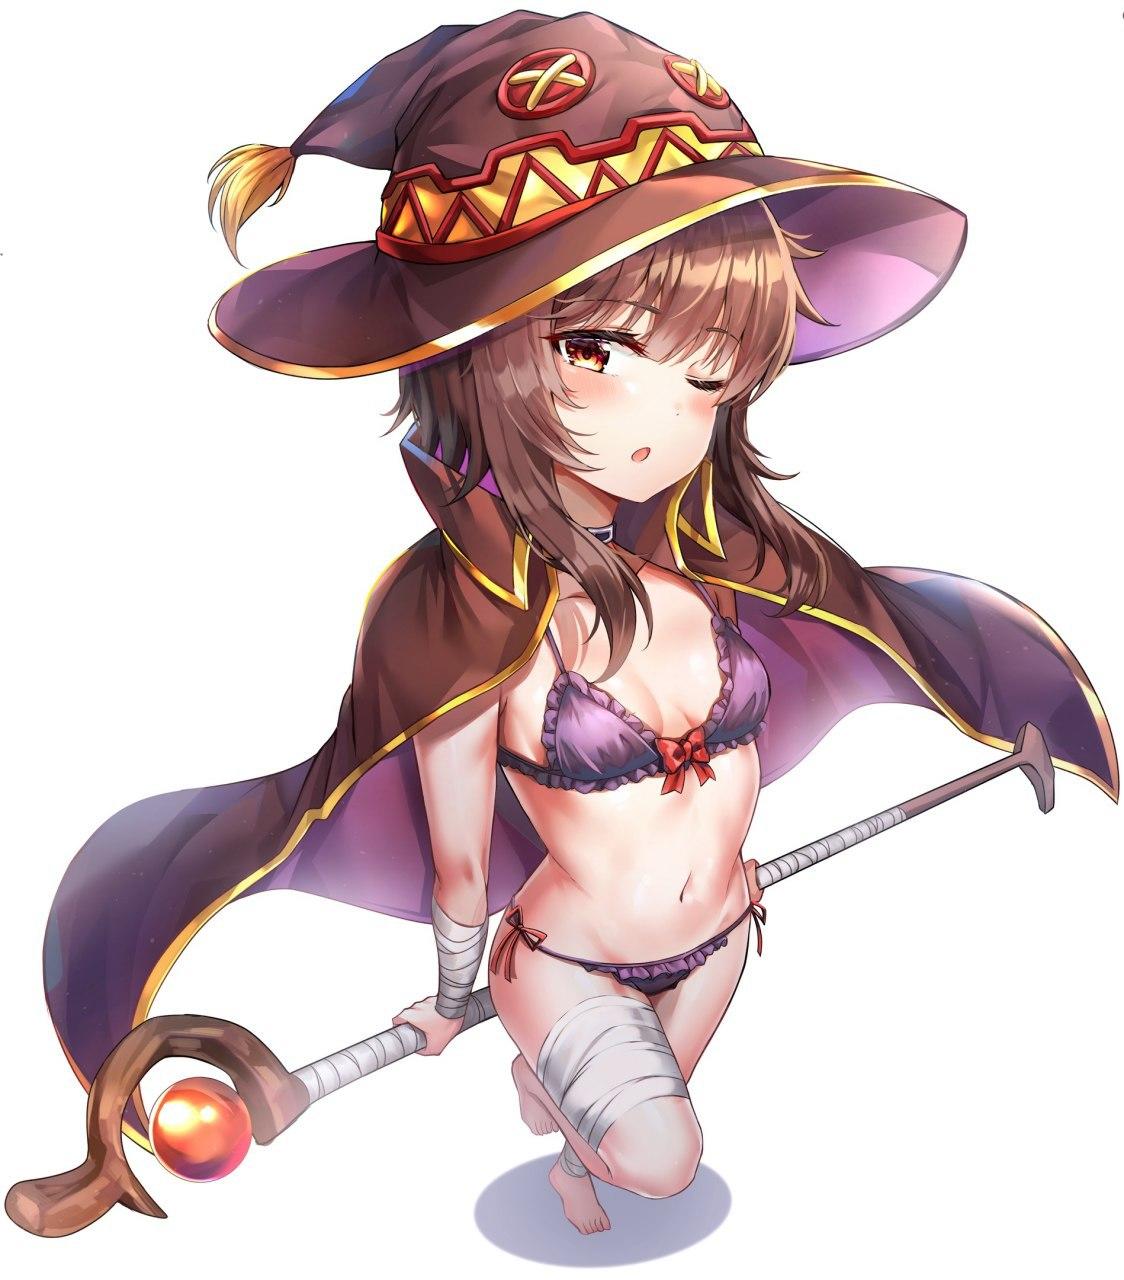 eco pasta Tibio Anime Embroidery Sexy Megumin - A.G.E Store | embroidery patterns